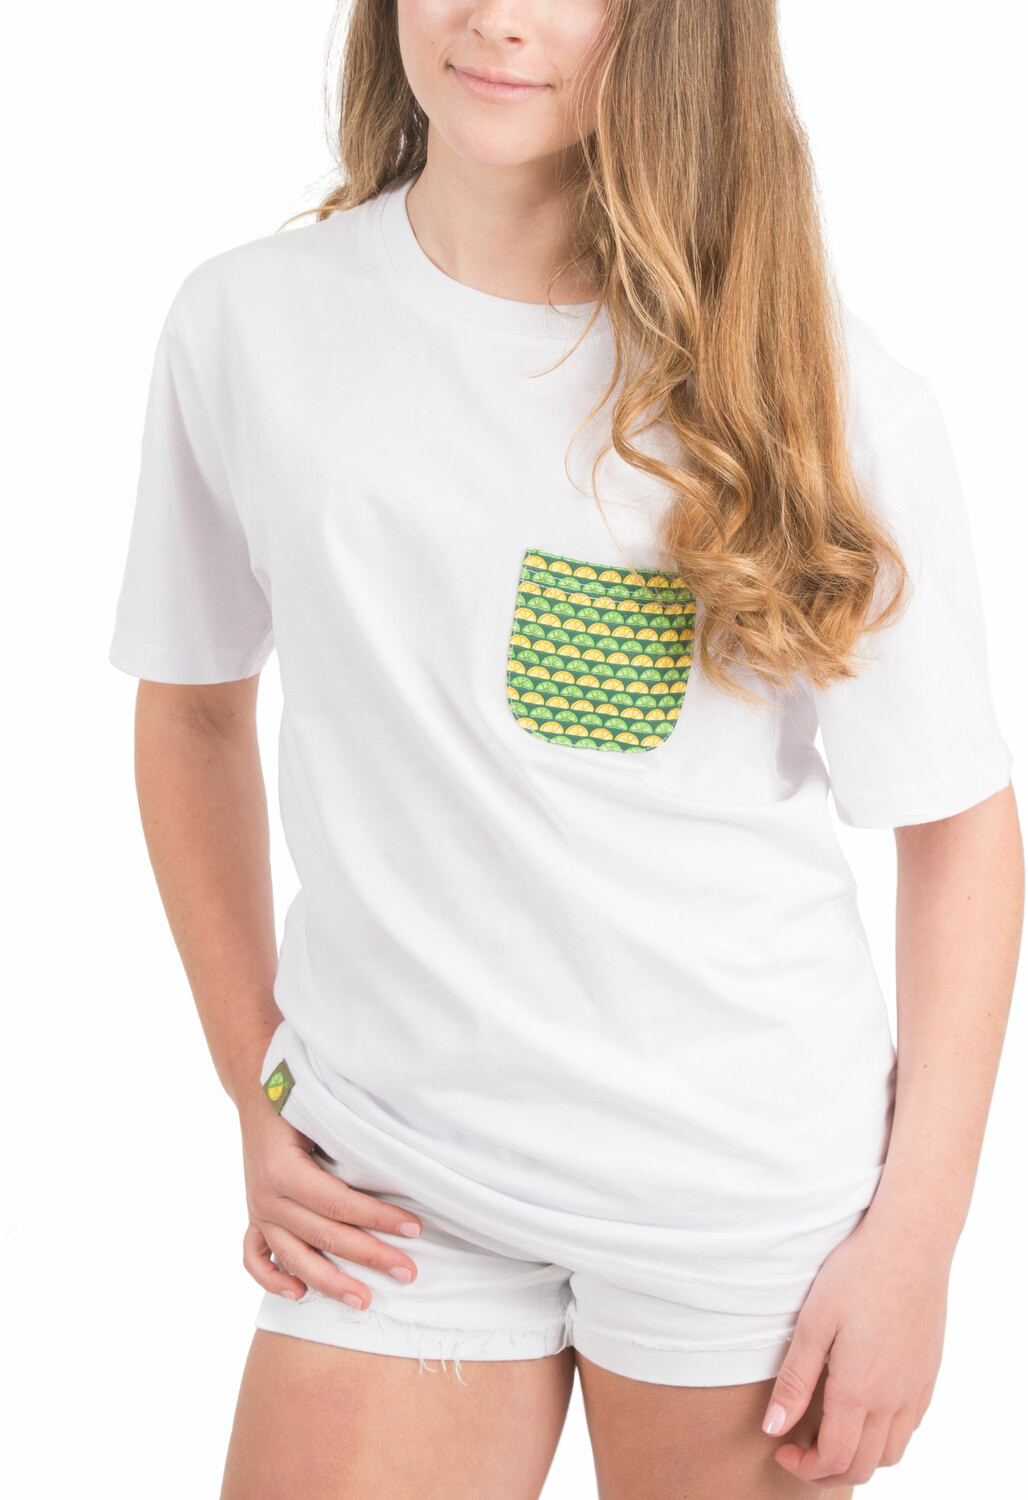 Squeeze the Day by Livin' on the Wedge - Squeeze the Day - S- 100% Cotton Soft Wash Unisex Pocket T-Shirt